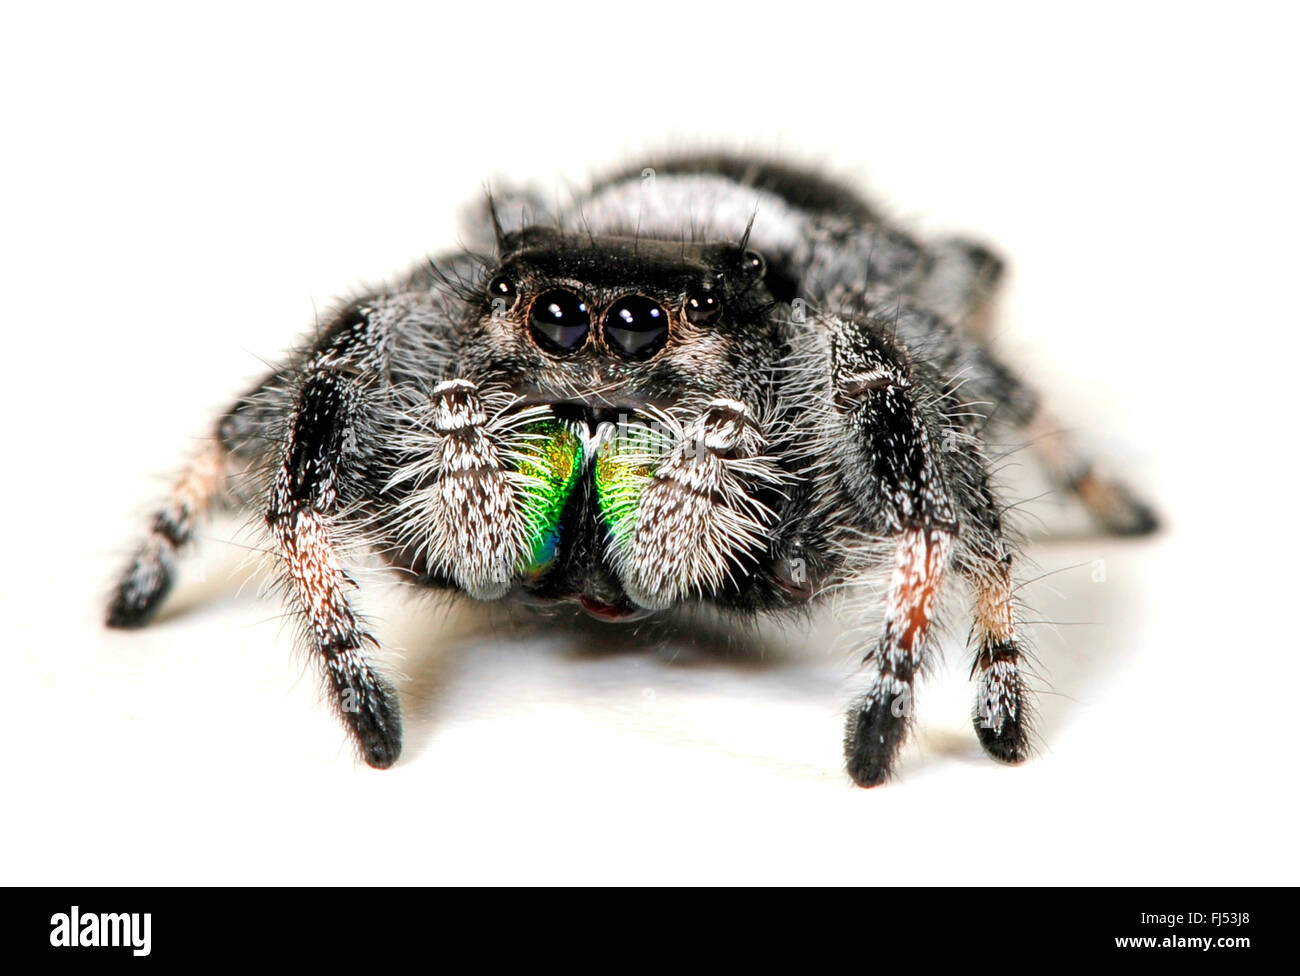 jumping spiders, regal jumping spider (Phidippus regius), one of the largest jumping spiders in the world, male, cut-out Stock Photo